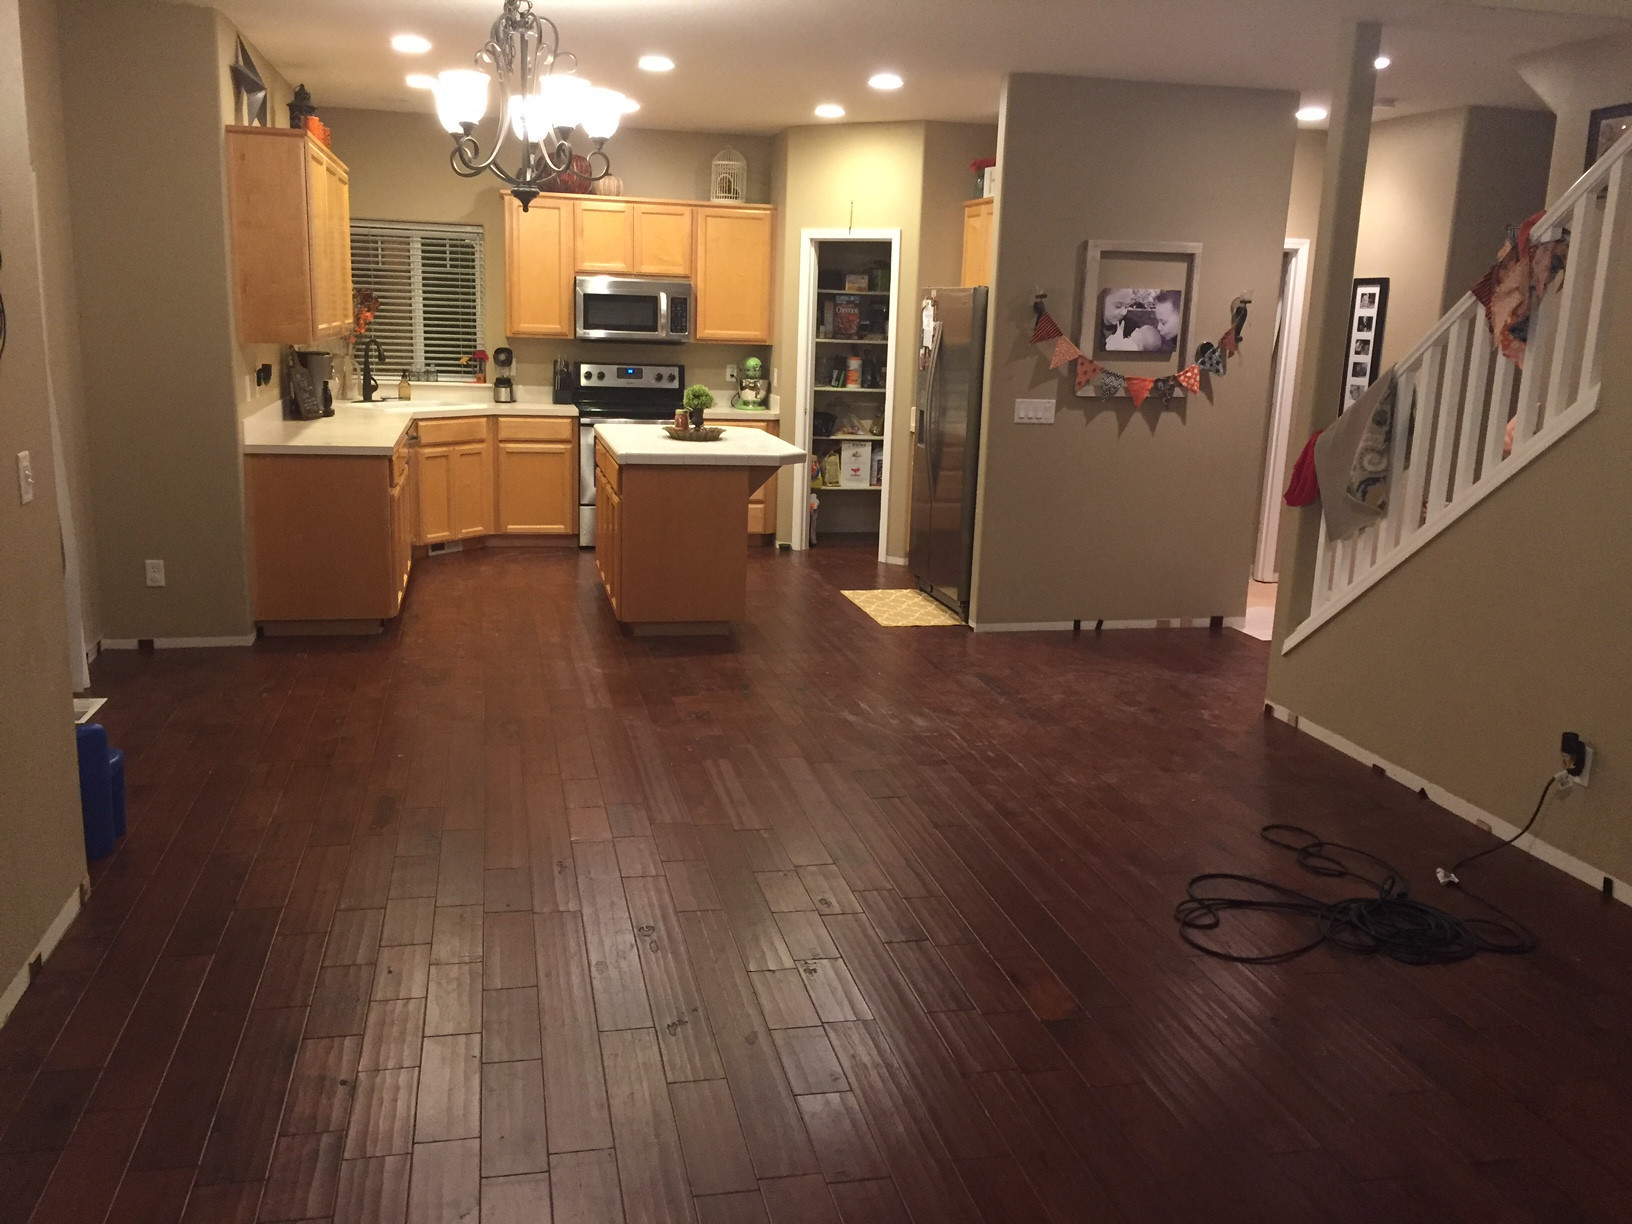 29 Lovely Hardwood Floor Repair Gaps In the Planks 2024 free download hardwood floor repair gaps in the planks of how to fix laminate flooring that is buckling repairing a wood floor throughout how to fix laminate flooring that is buckling how can i secure fas